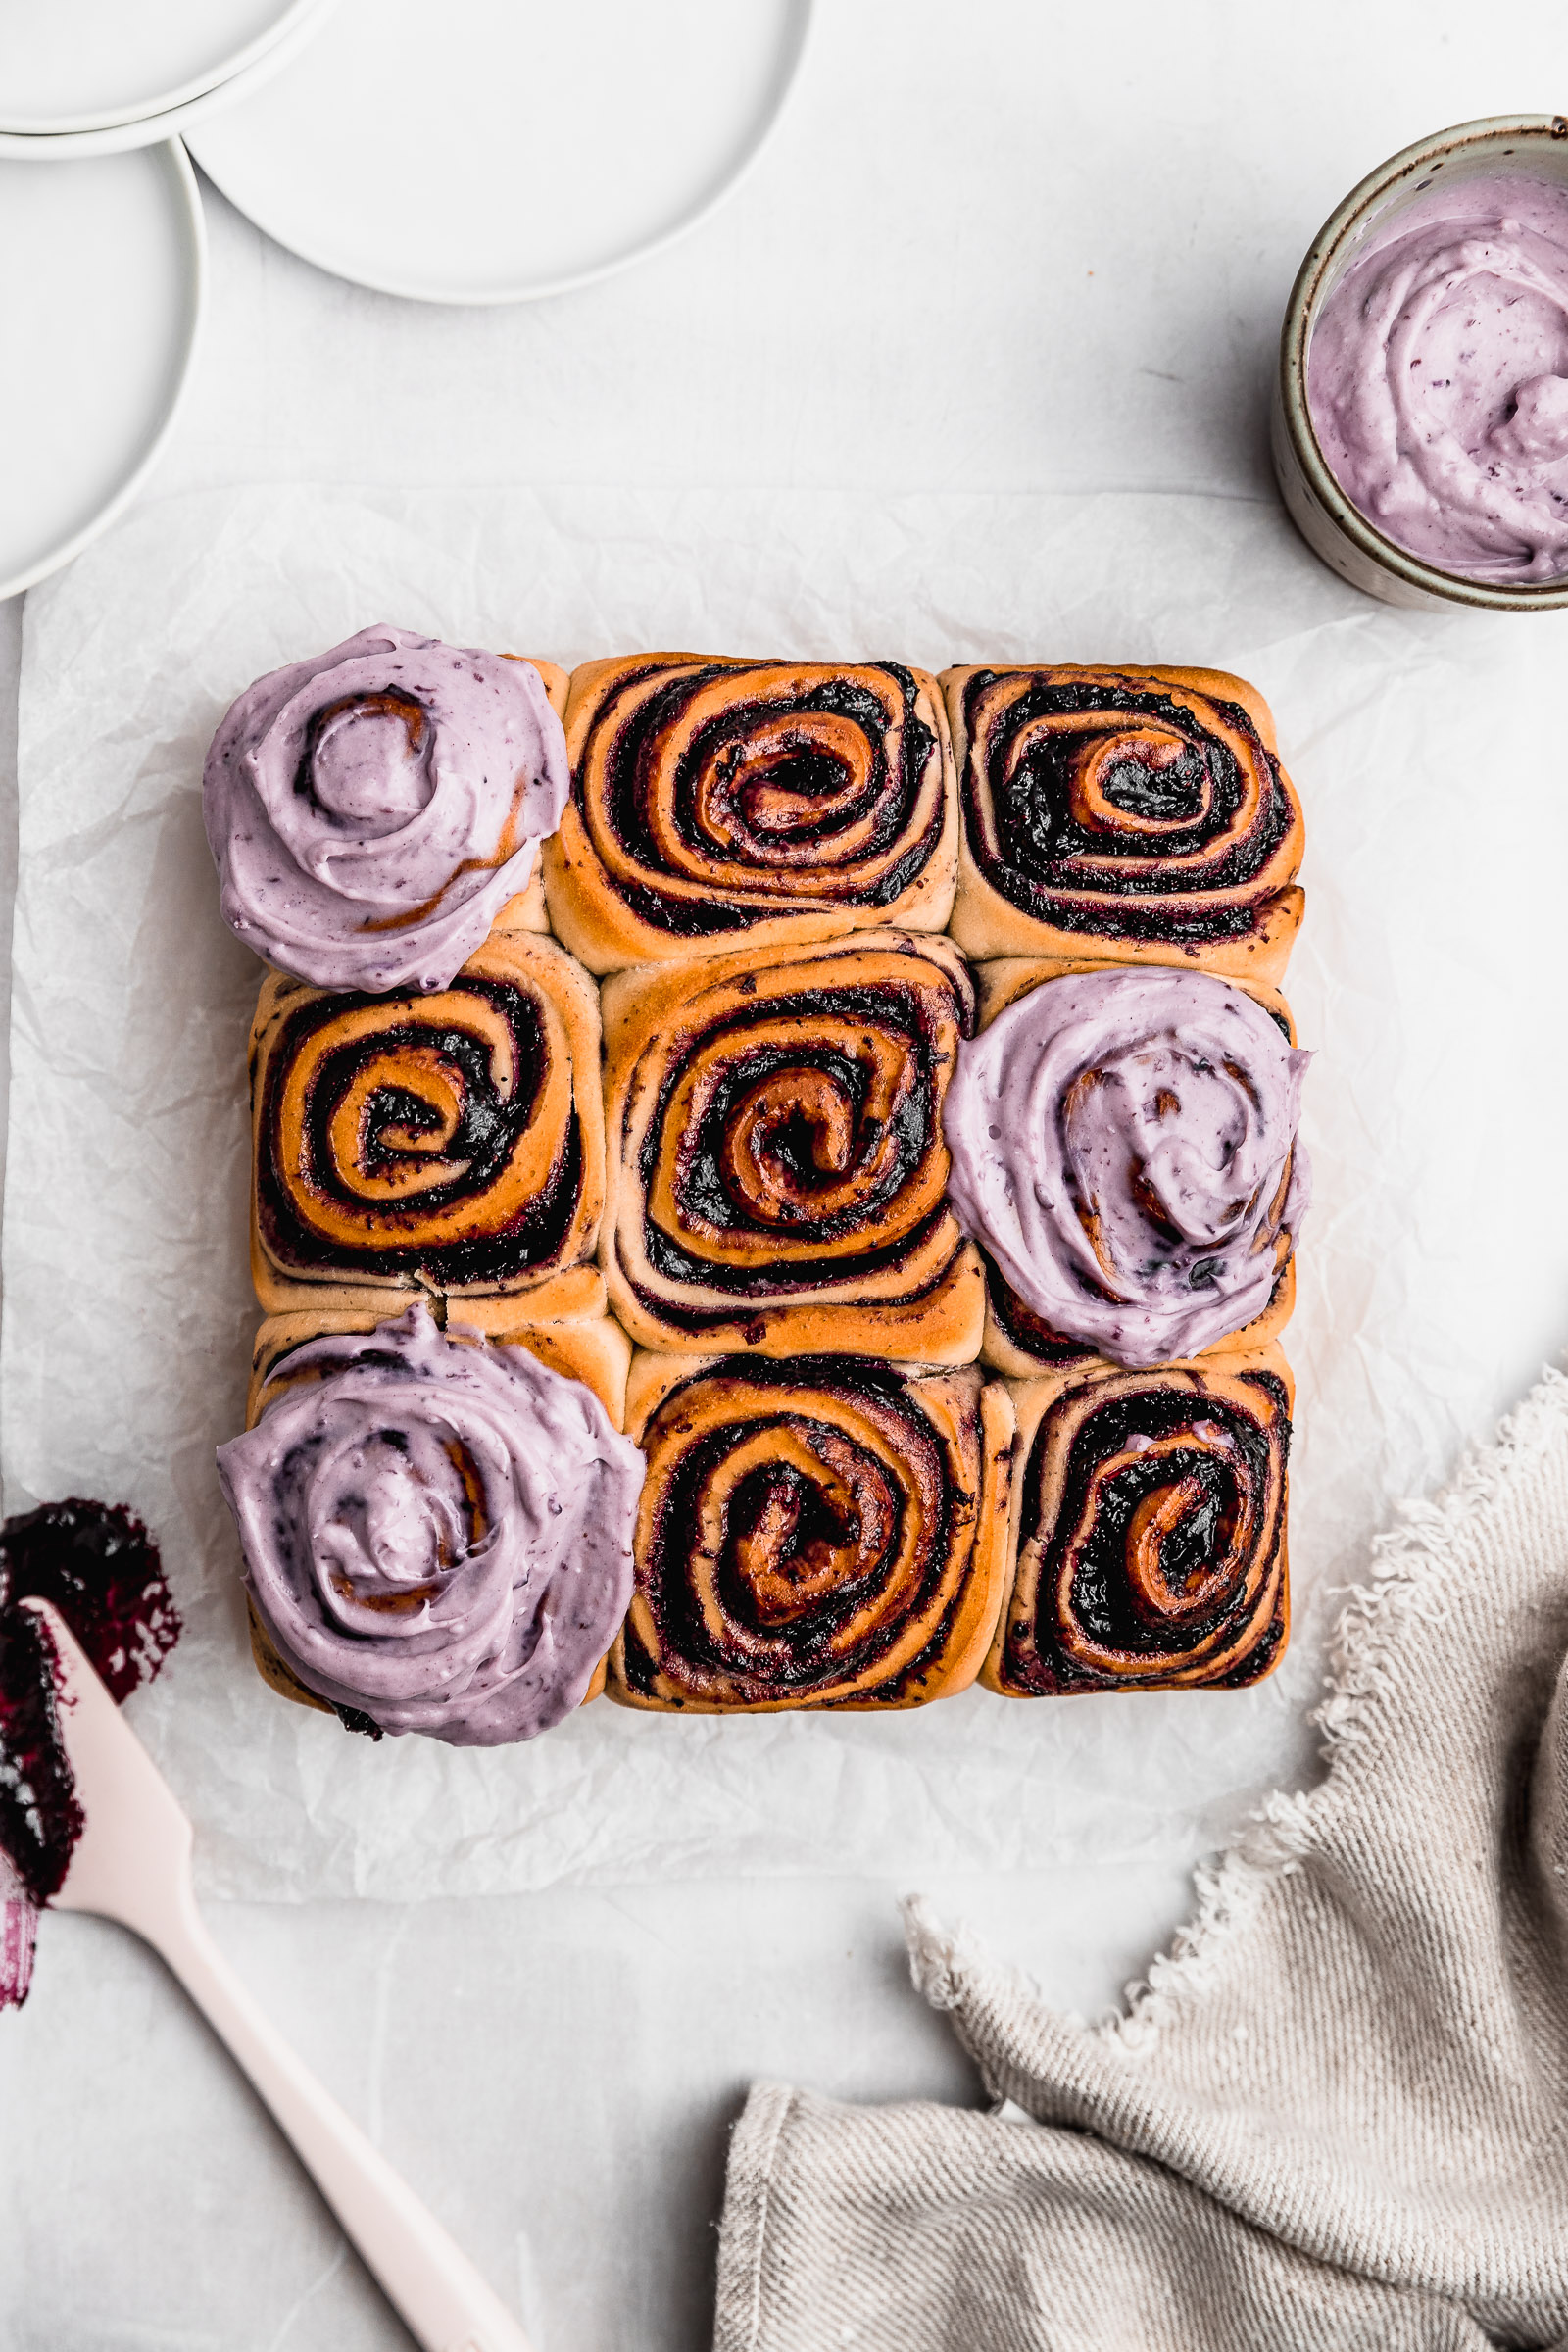 Top view of Blueberry Cinnamon Rolls (Blueberry Rolls), with some of them topped with blueberry cream cheese frosting.